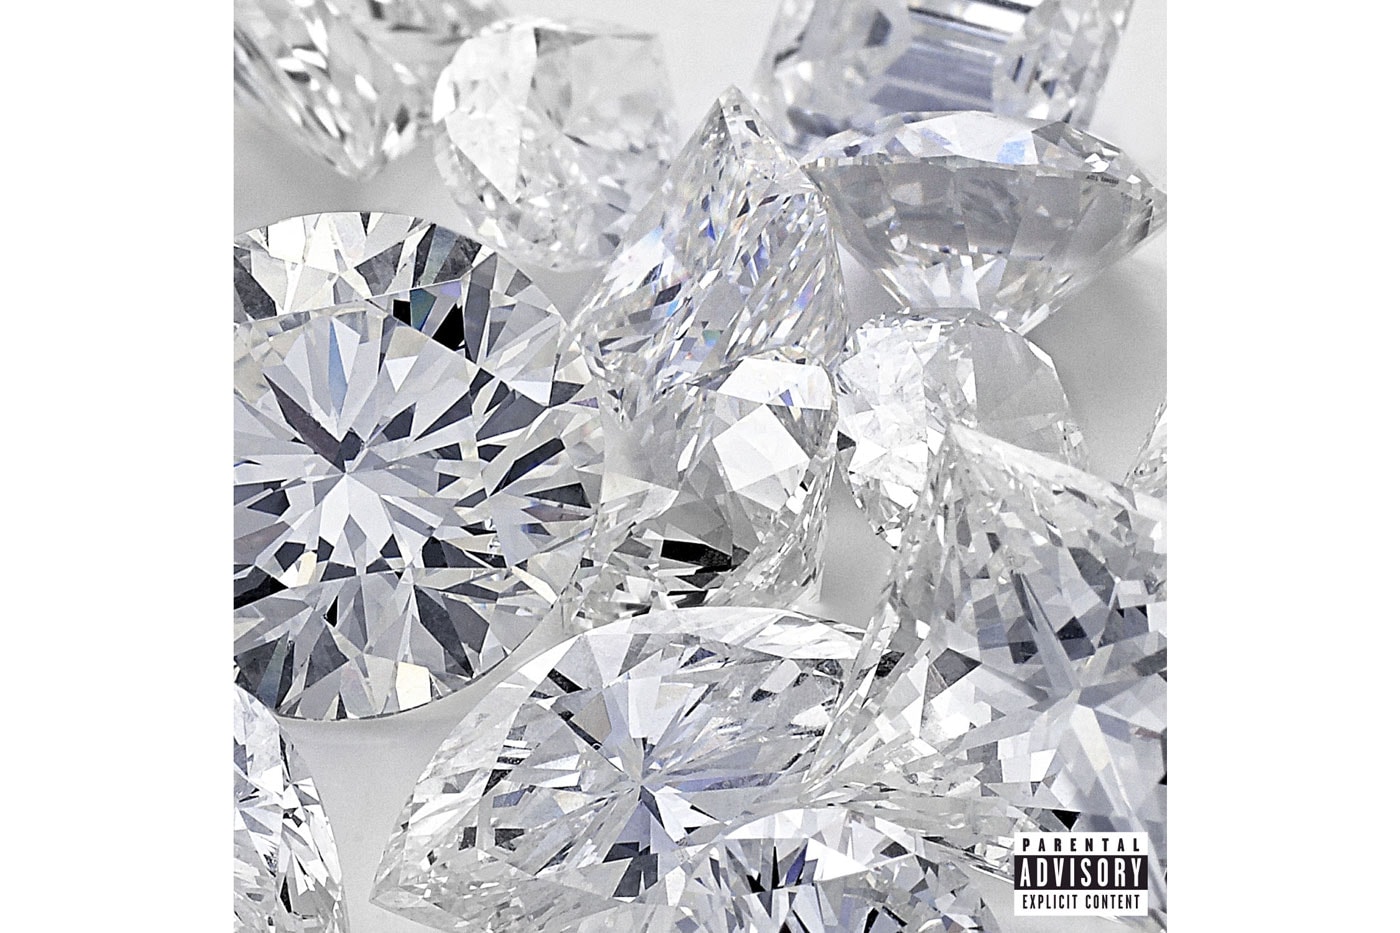 Drake and Future's 'What a Time to Be Alive' Set to Sell 500,000 Copies in First Week